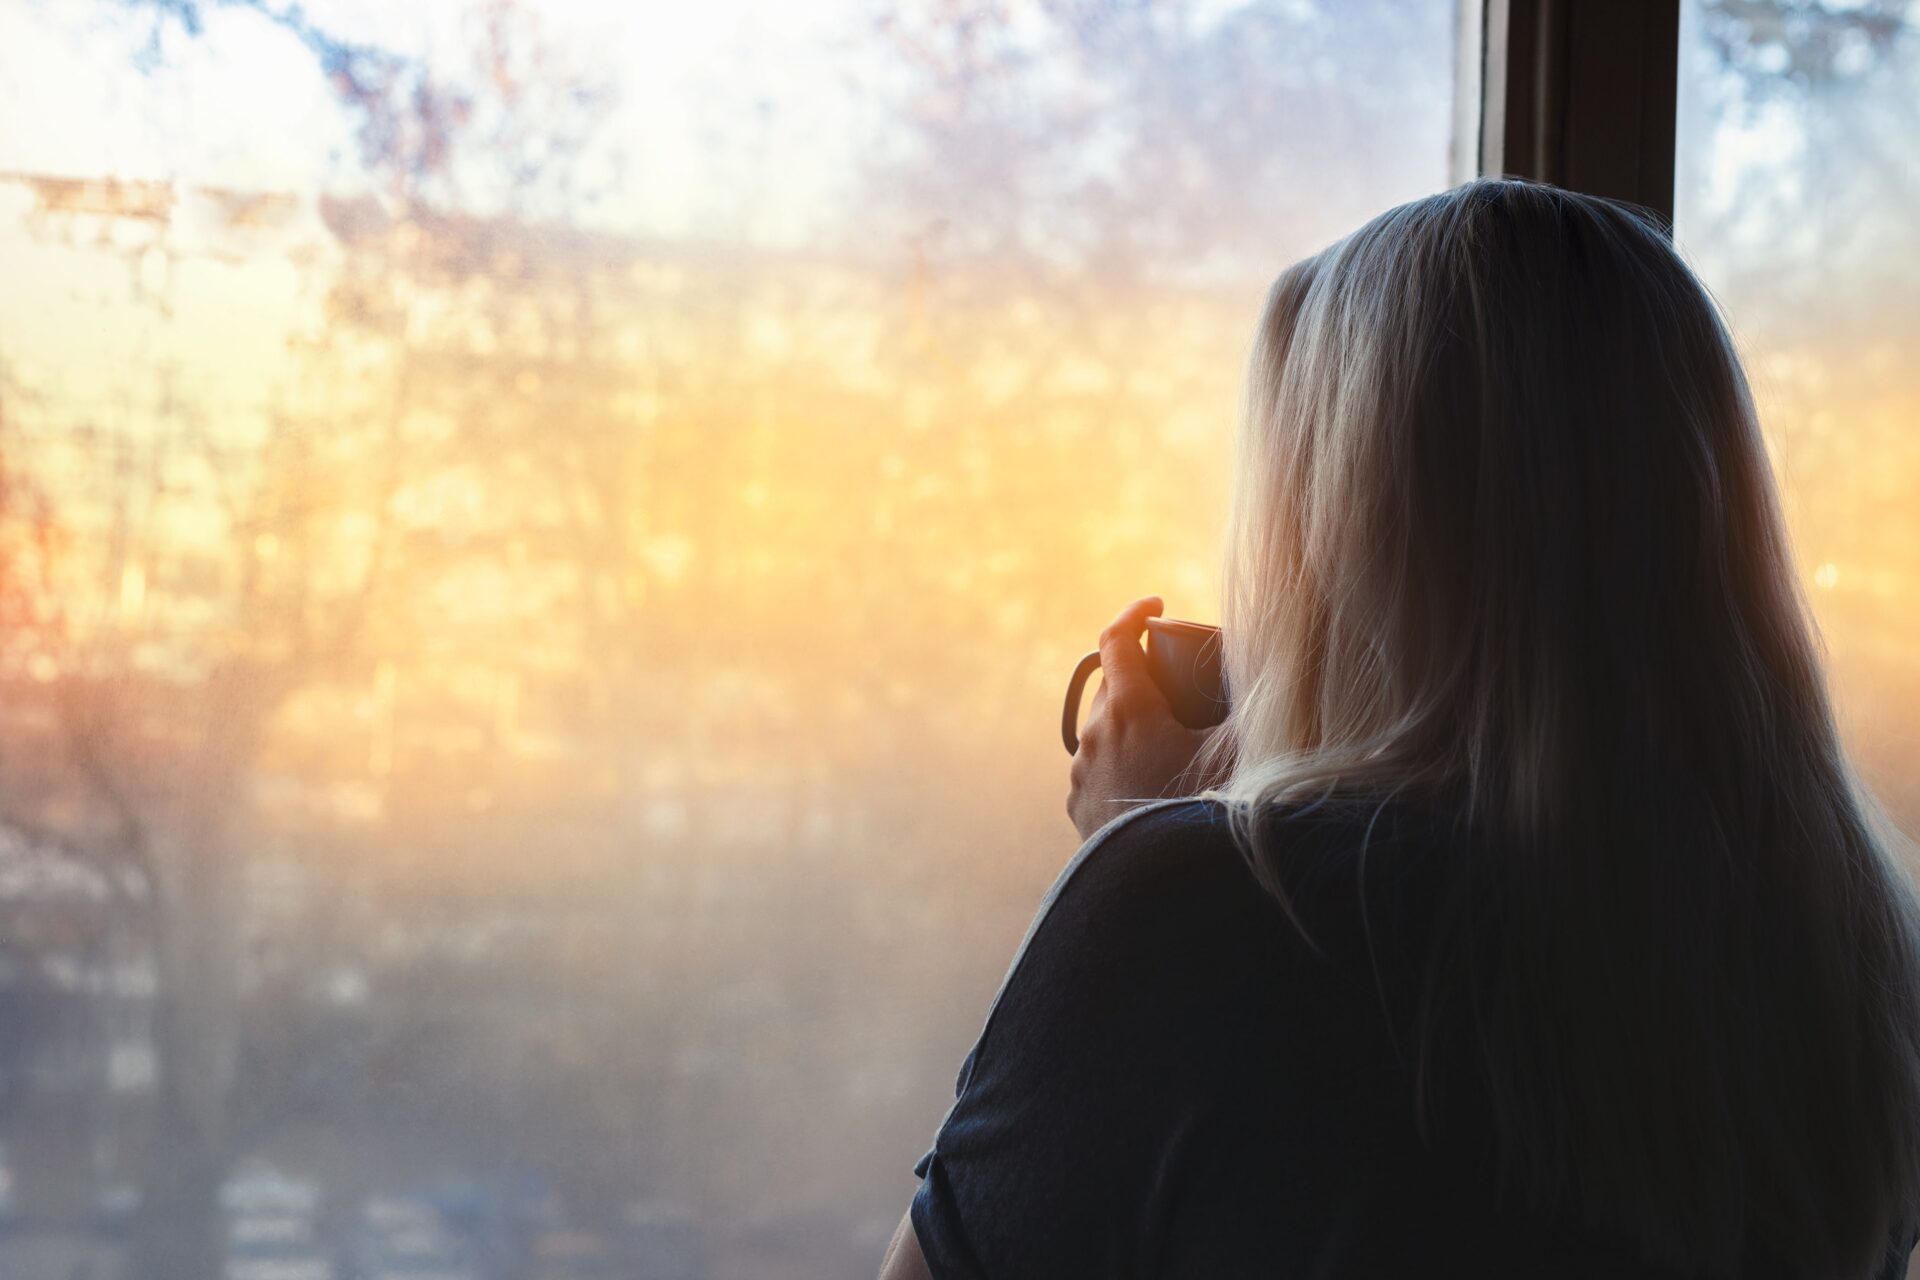 A woman looking out the window drinking coffee at sunrise.